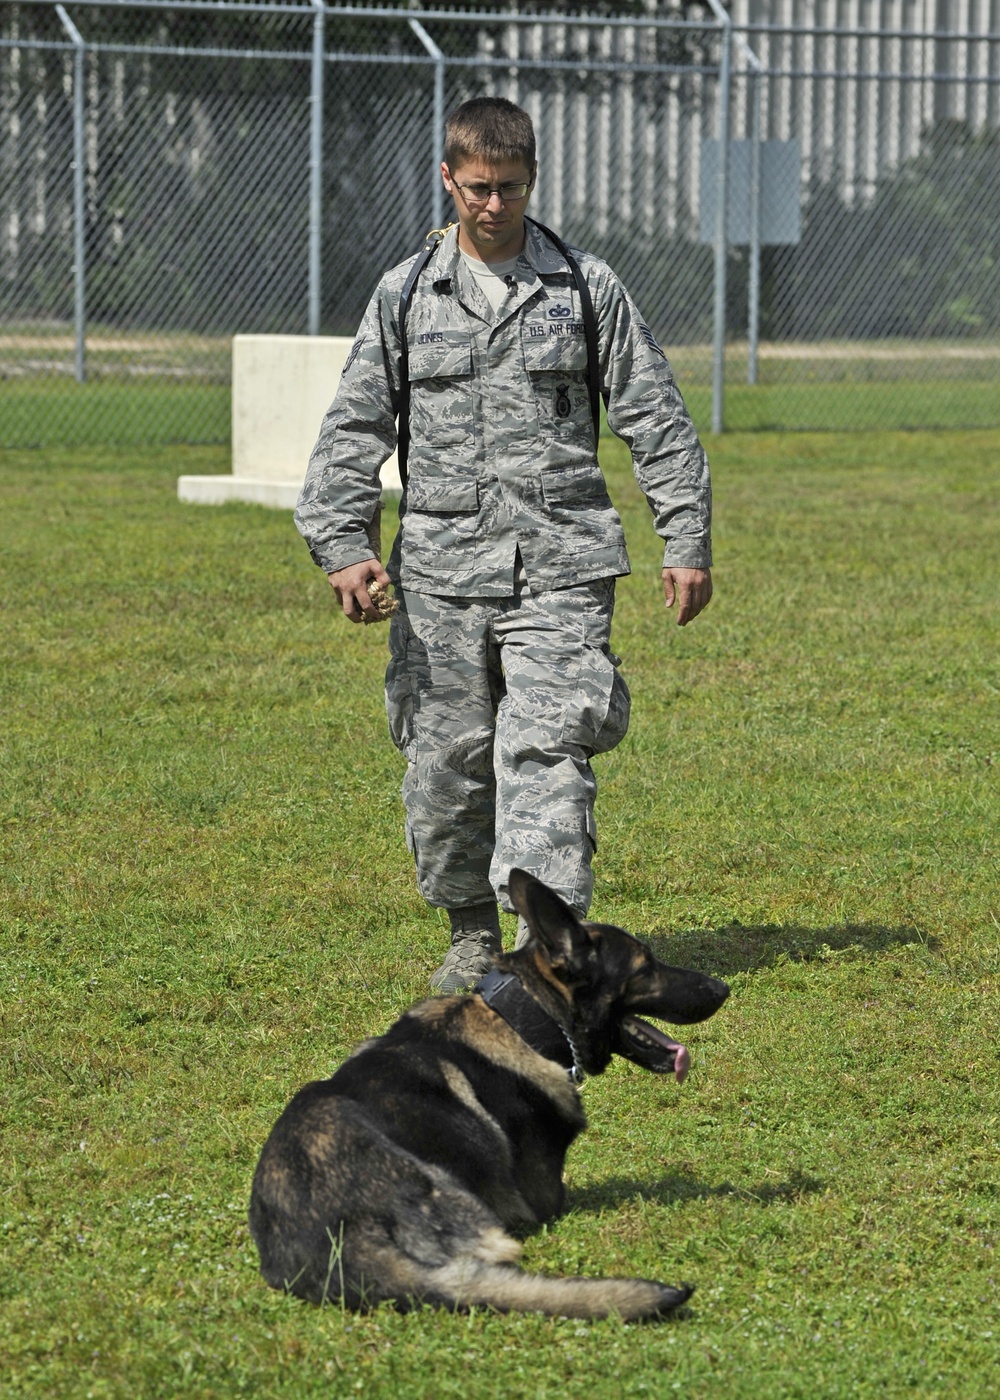 325th Security Forces Squadron military working dog training